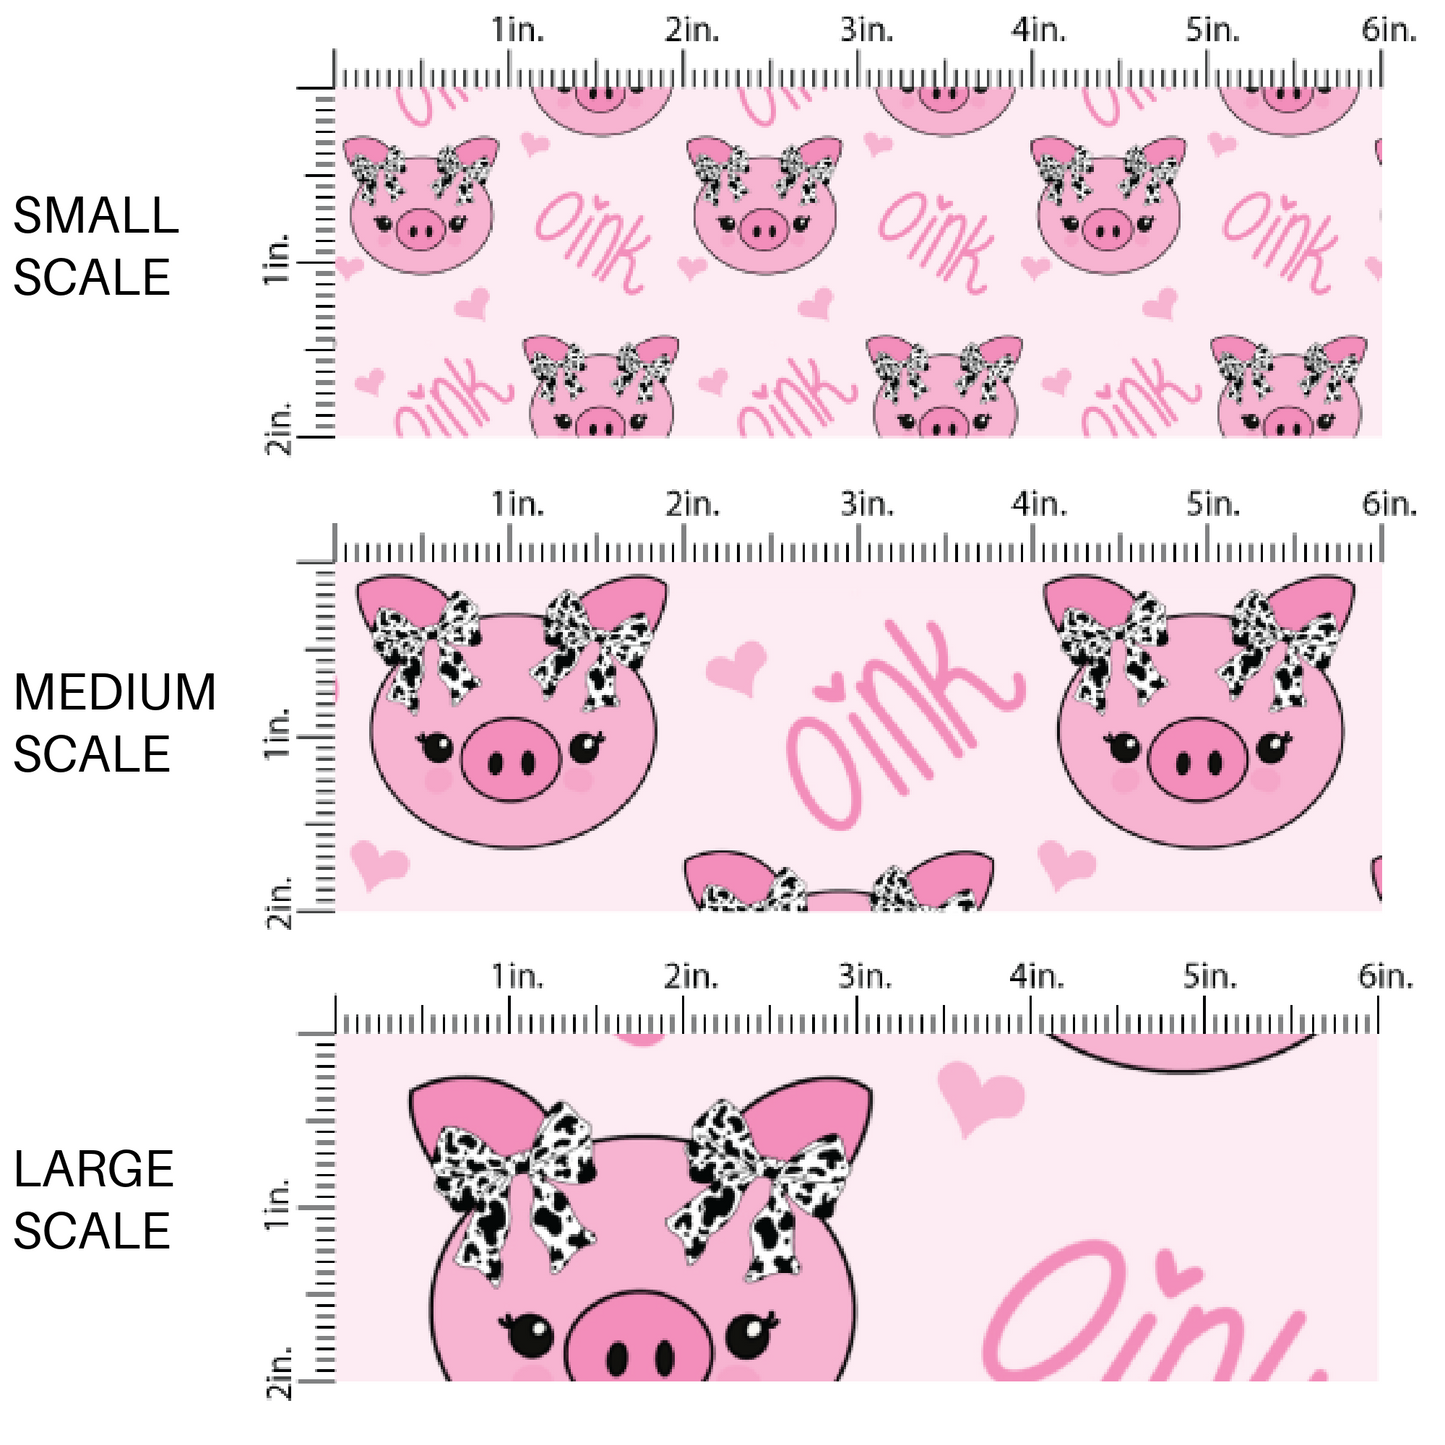 Pink Piggies and the word "Oink" on Baby Pink Fabric by the Yard scaled image guide.